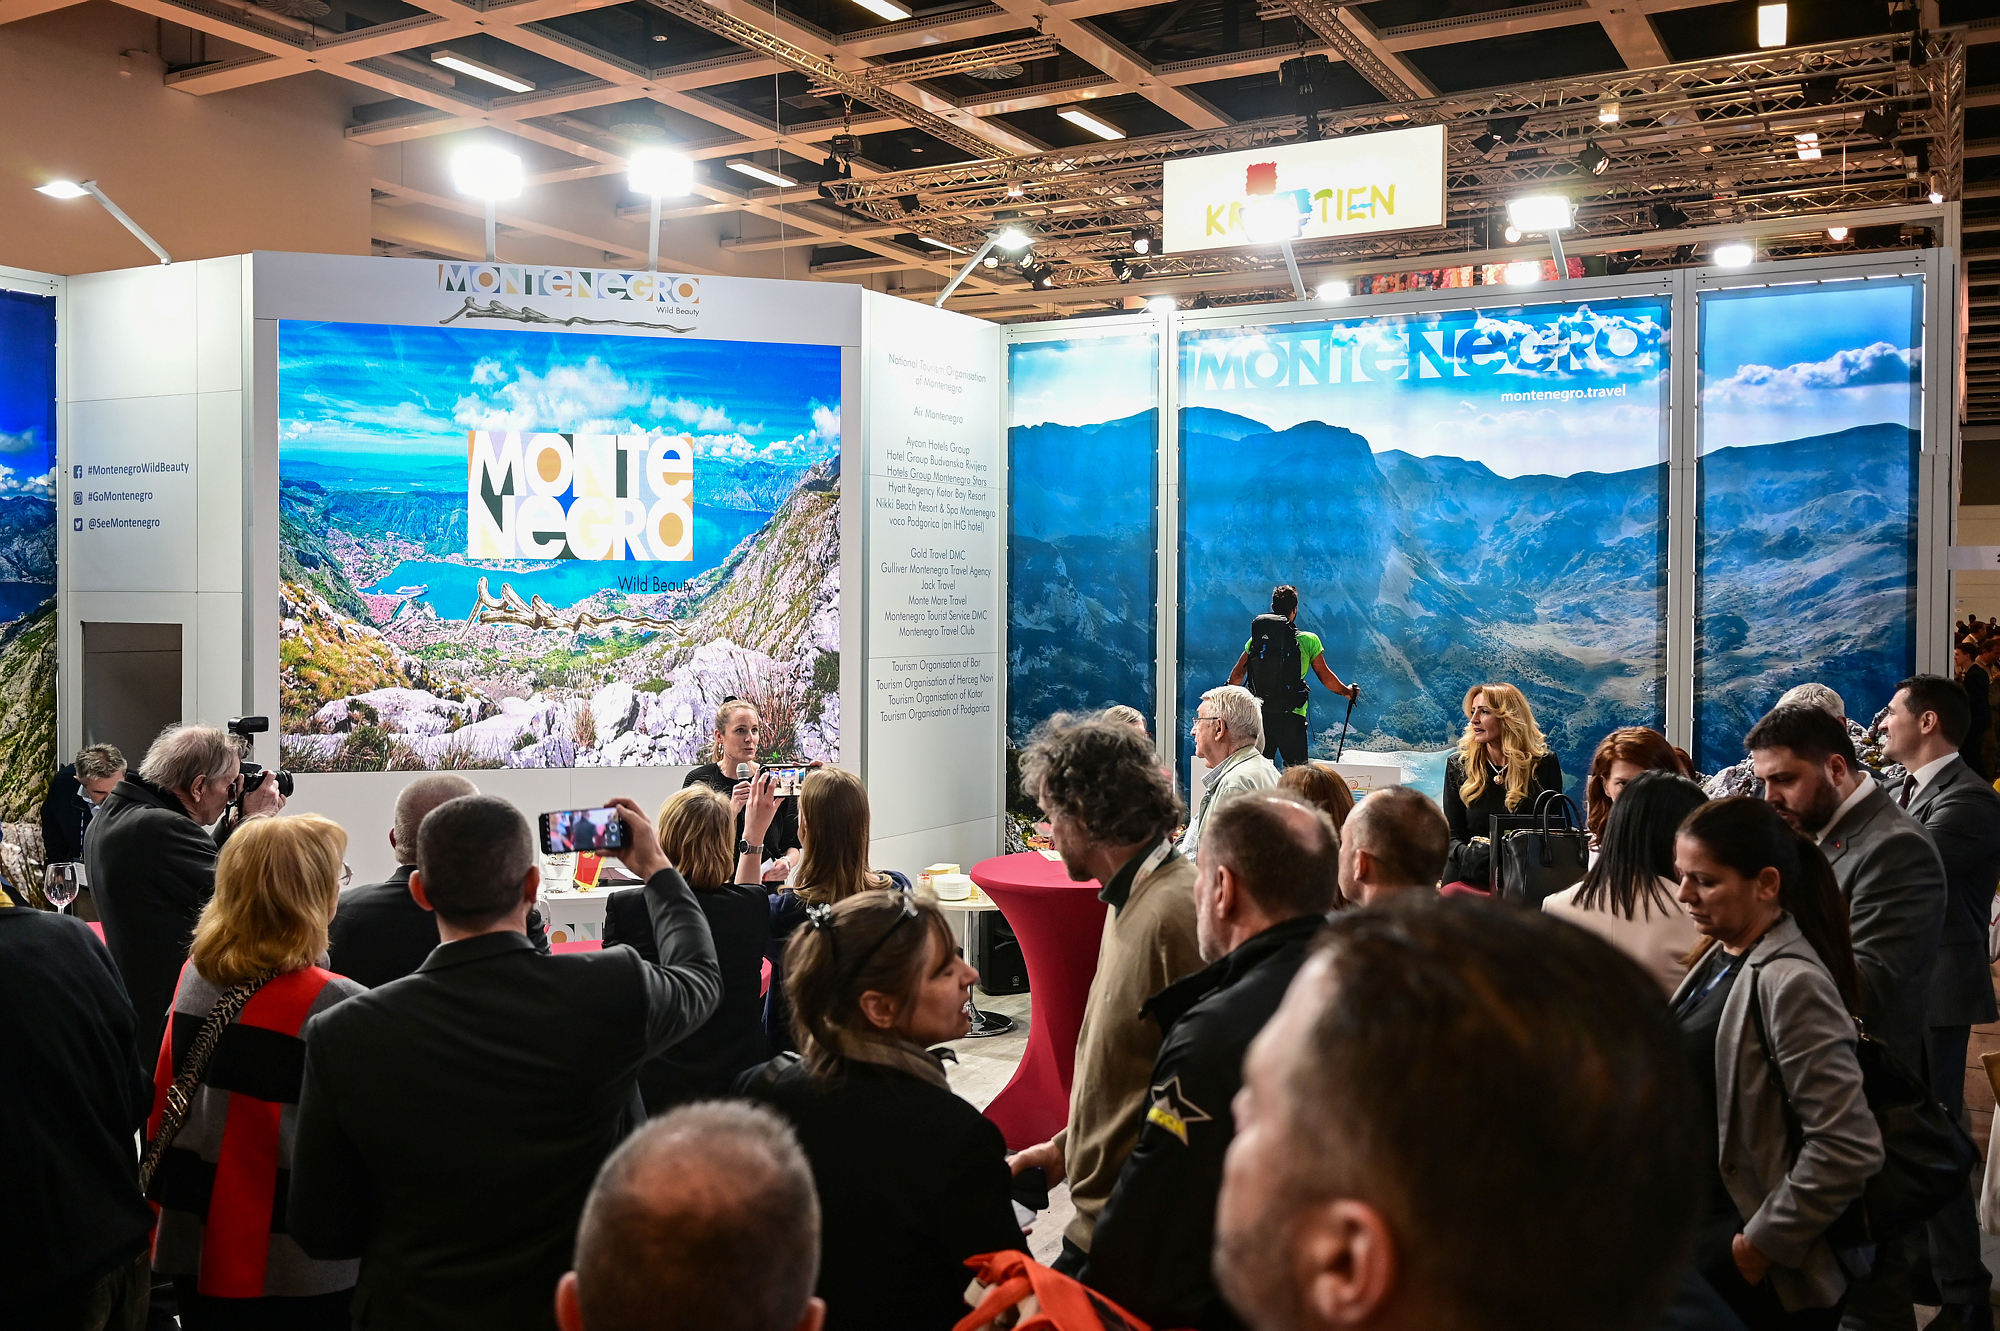 Groups of people with their backs to the camera in the foreground, an exhibitor’s stand with images of landscapes, including mountain scenery in Montenegro, in the background.